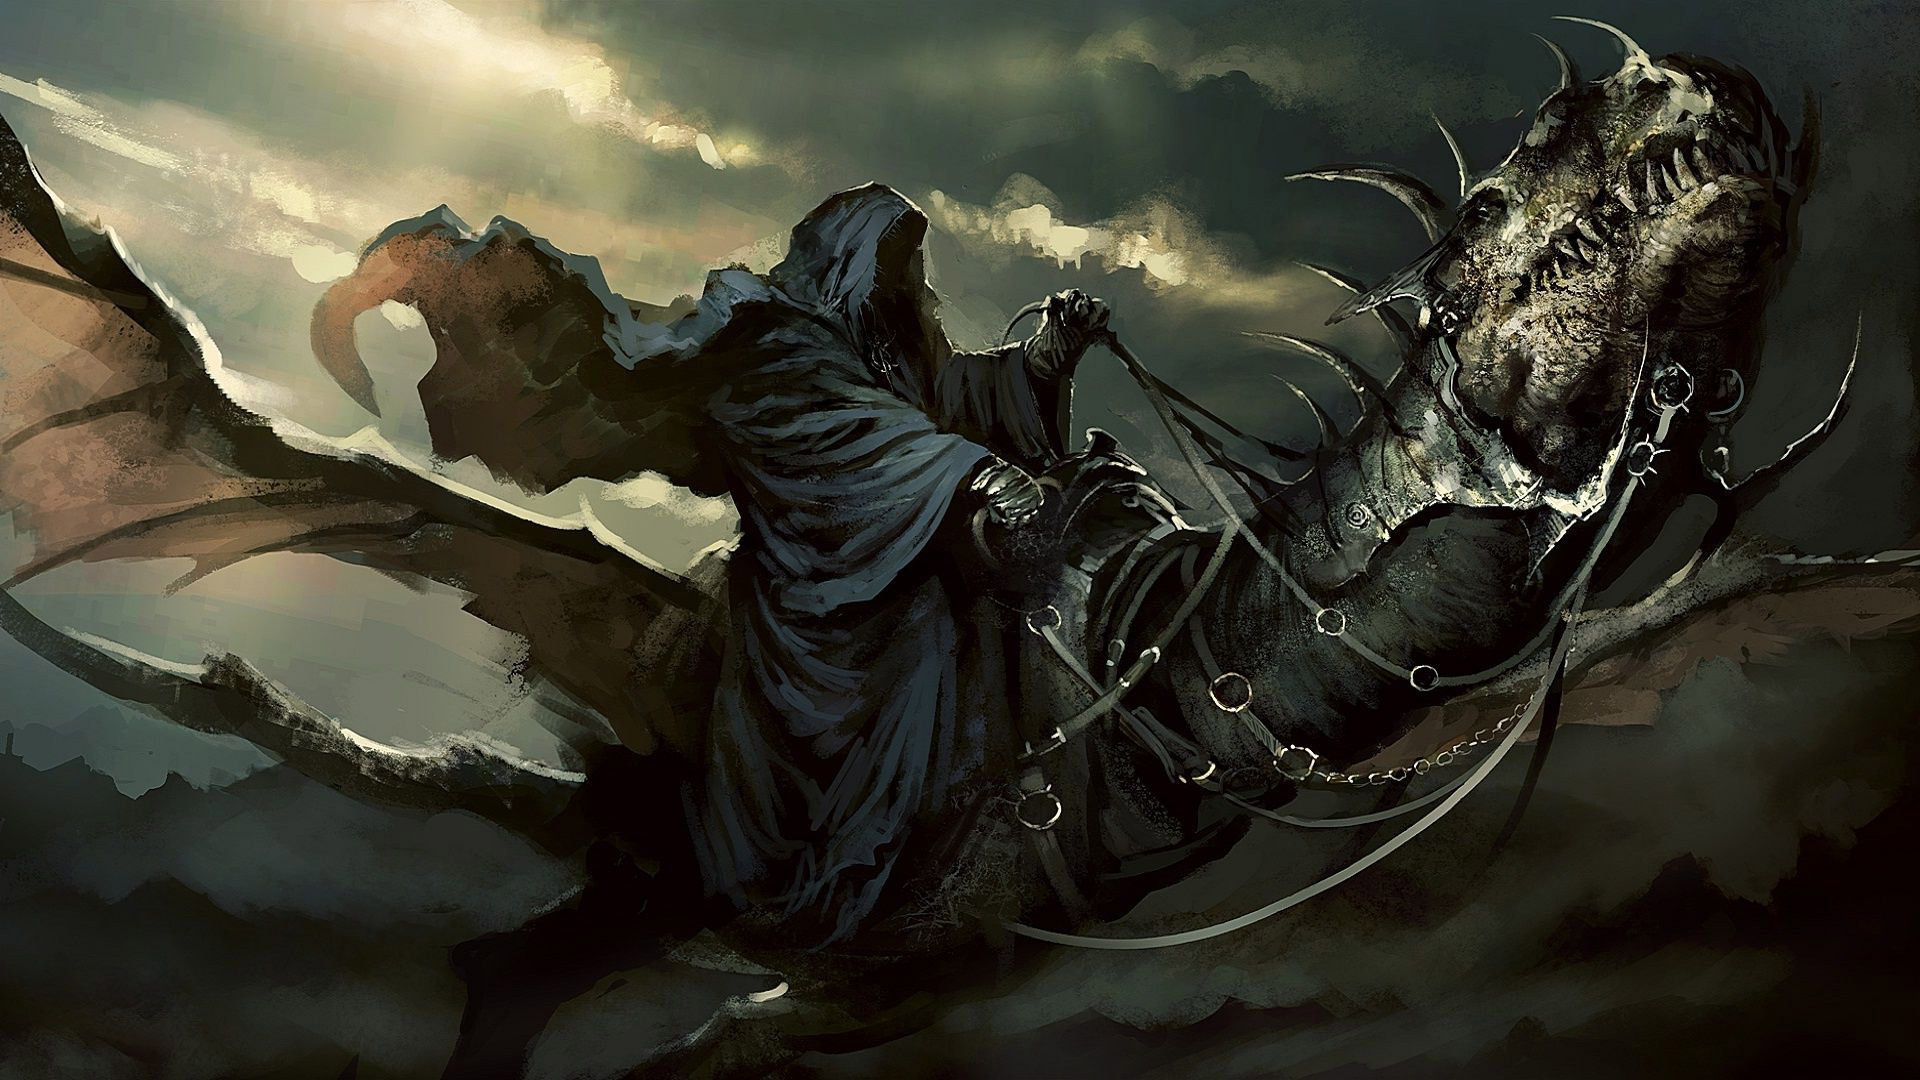 Lord of the Rings Nazgul wallpaper 18465